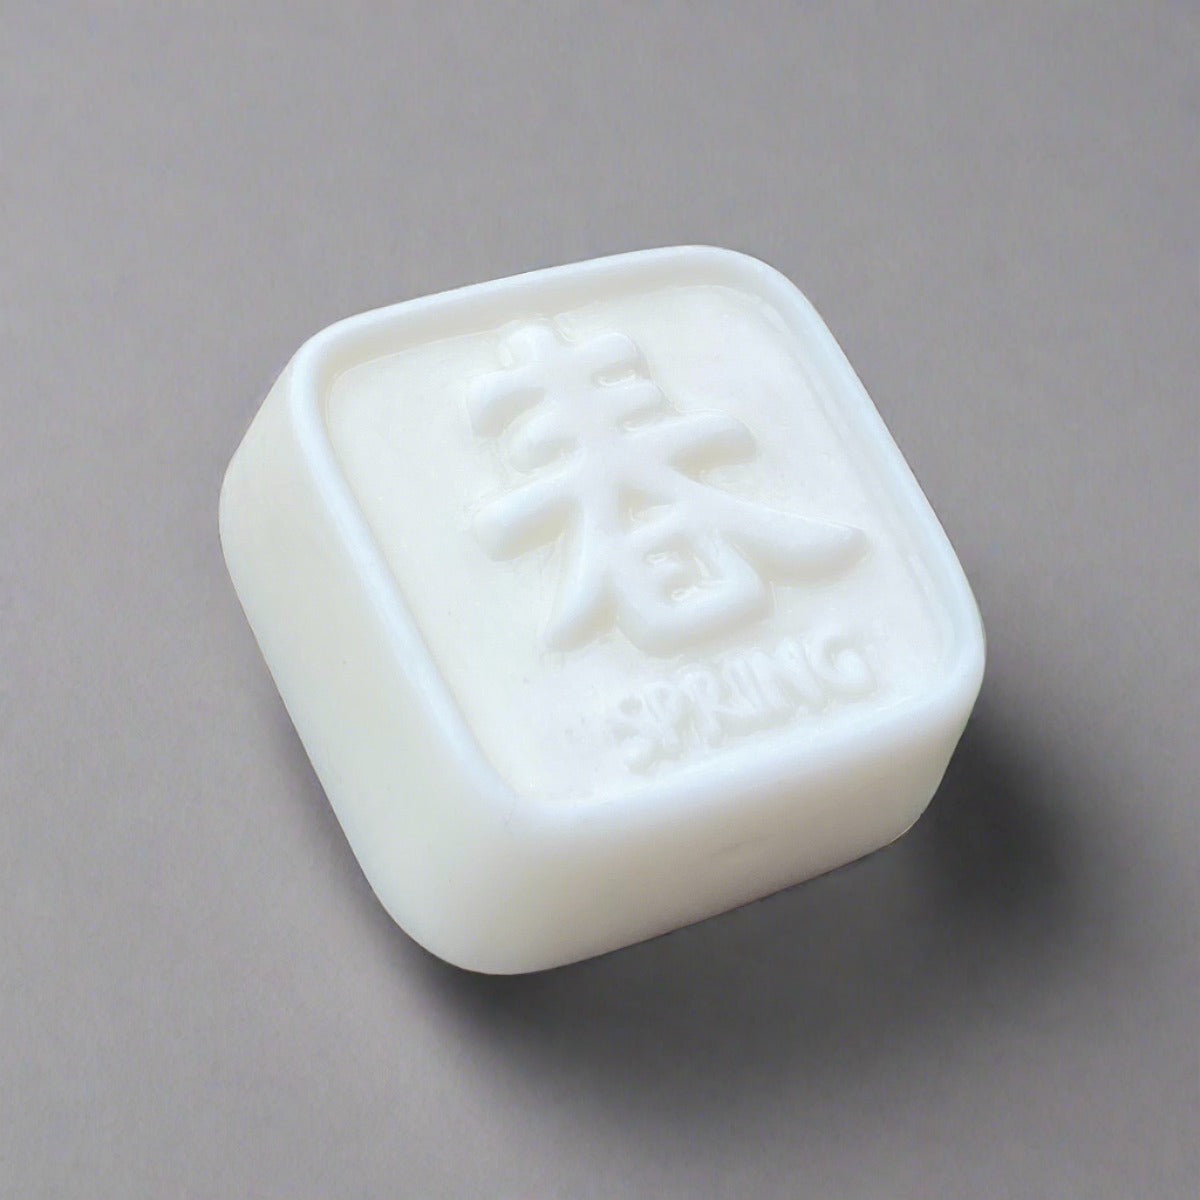 Bar of white soap with beautiful Chinese symbols meaning "spring" design